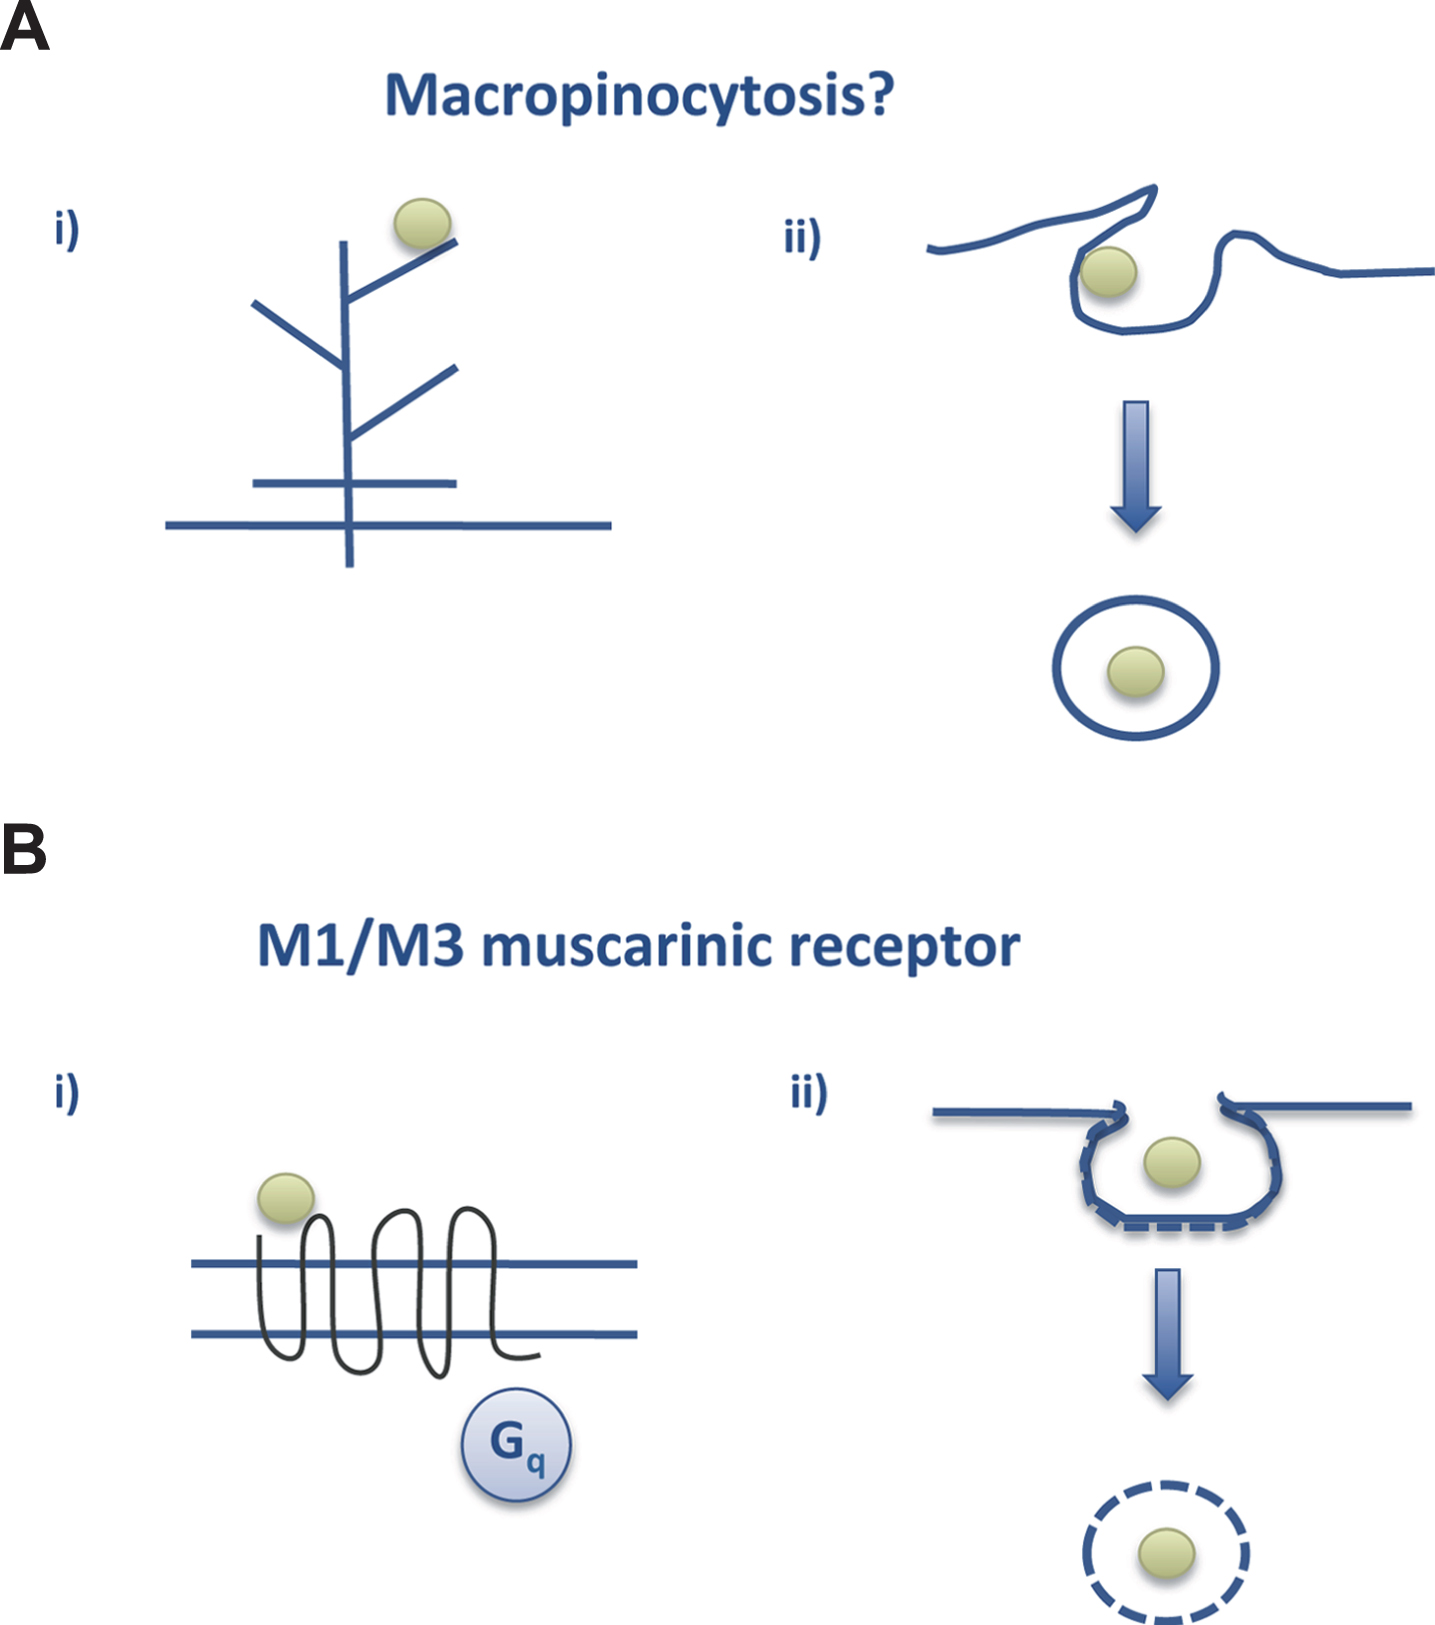 Tau endocytosis. A) Macropinocytosis could be the way by which aggregated tau interacts with neurons to go into the cell whereas (B) soluble tau may interact with the M1/M3 muscarinic receptors present in neurons (see text and [28, 52]).